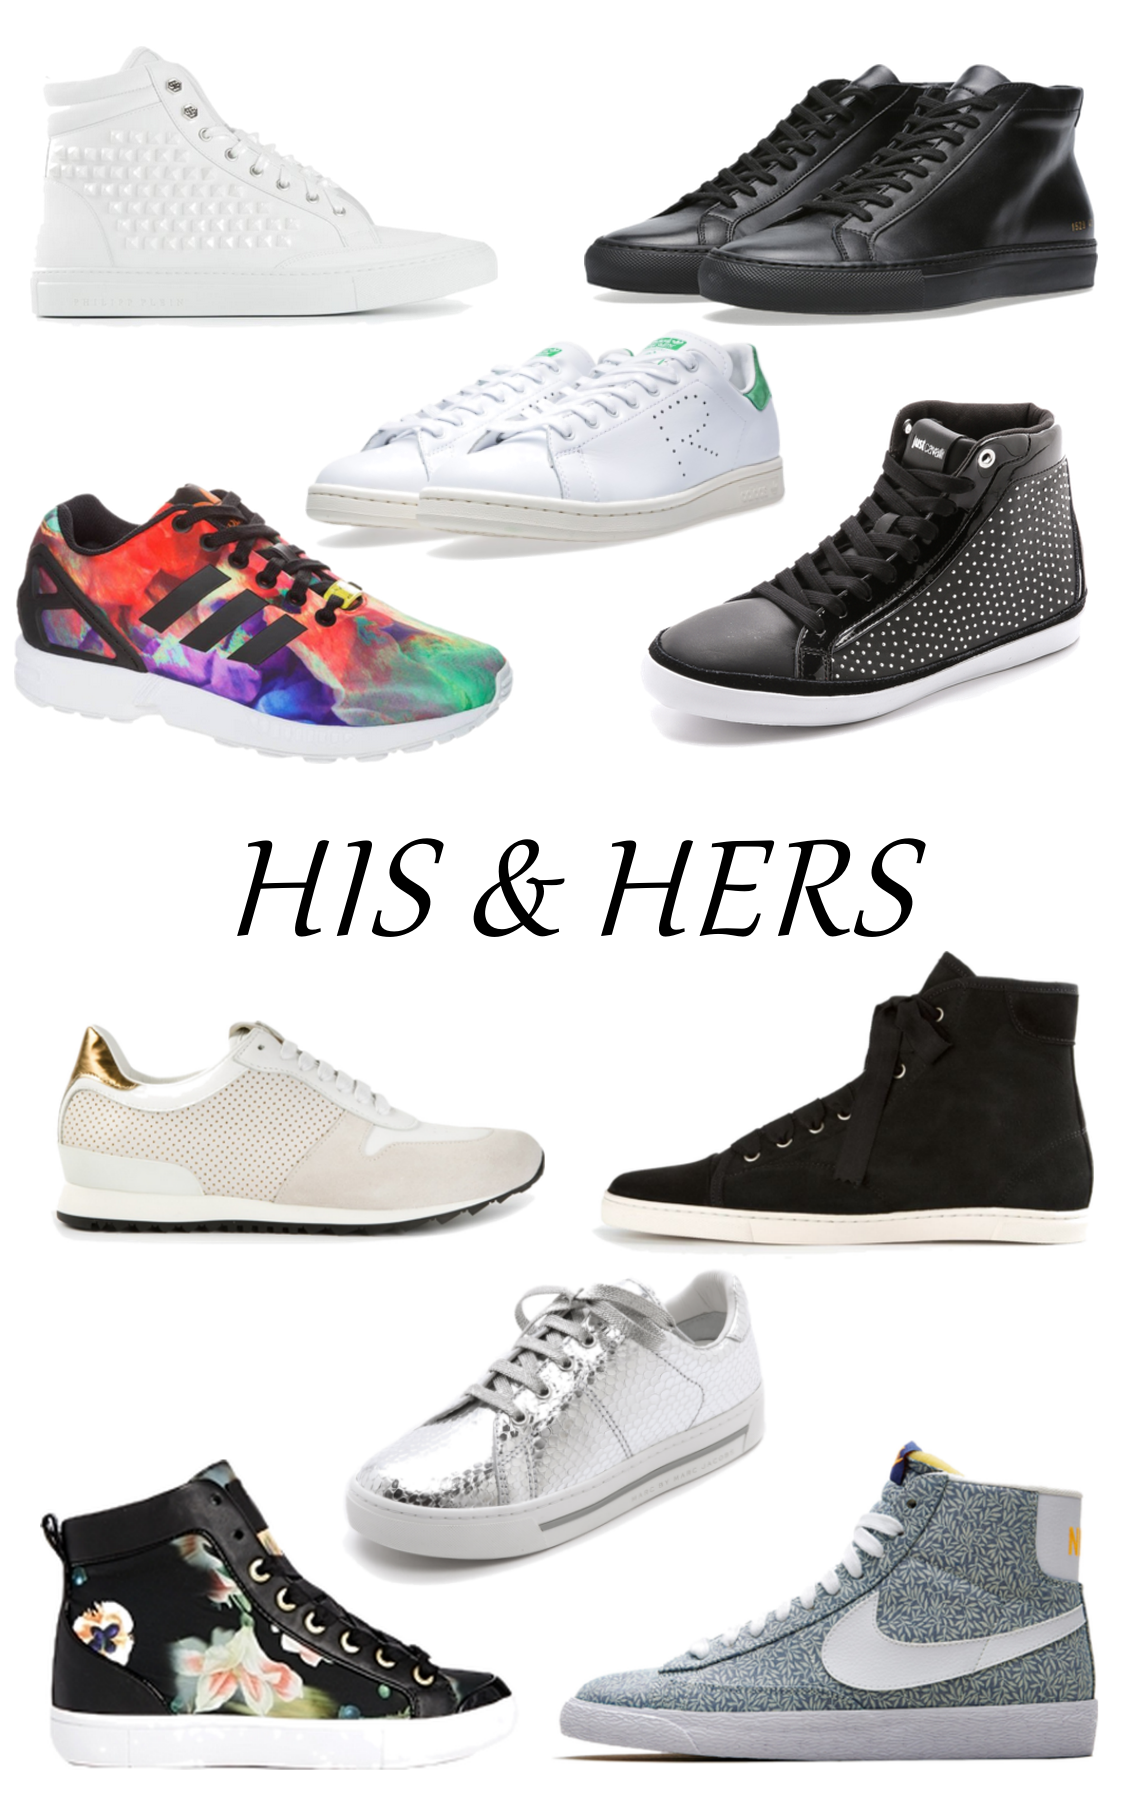 His & Hers - Trainers To Dress Up In